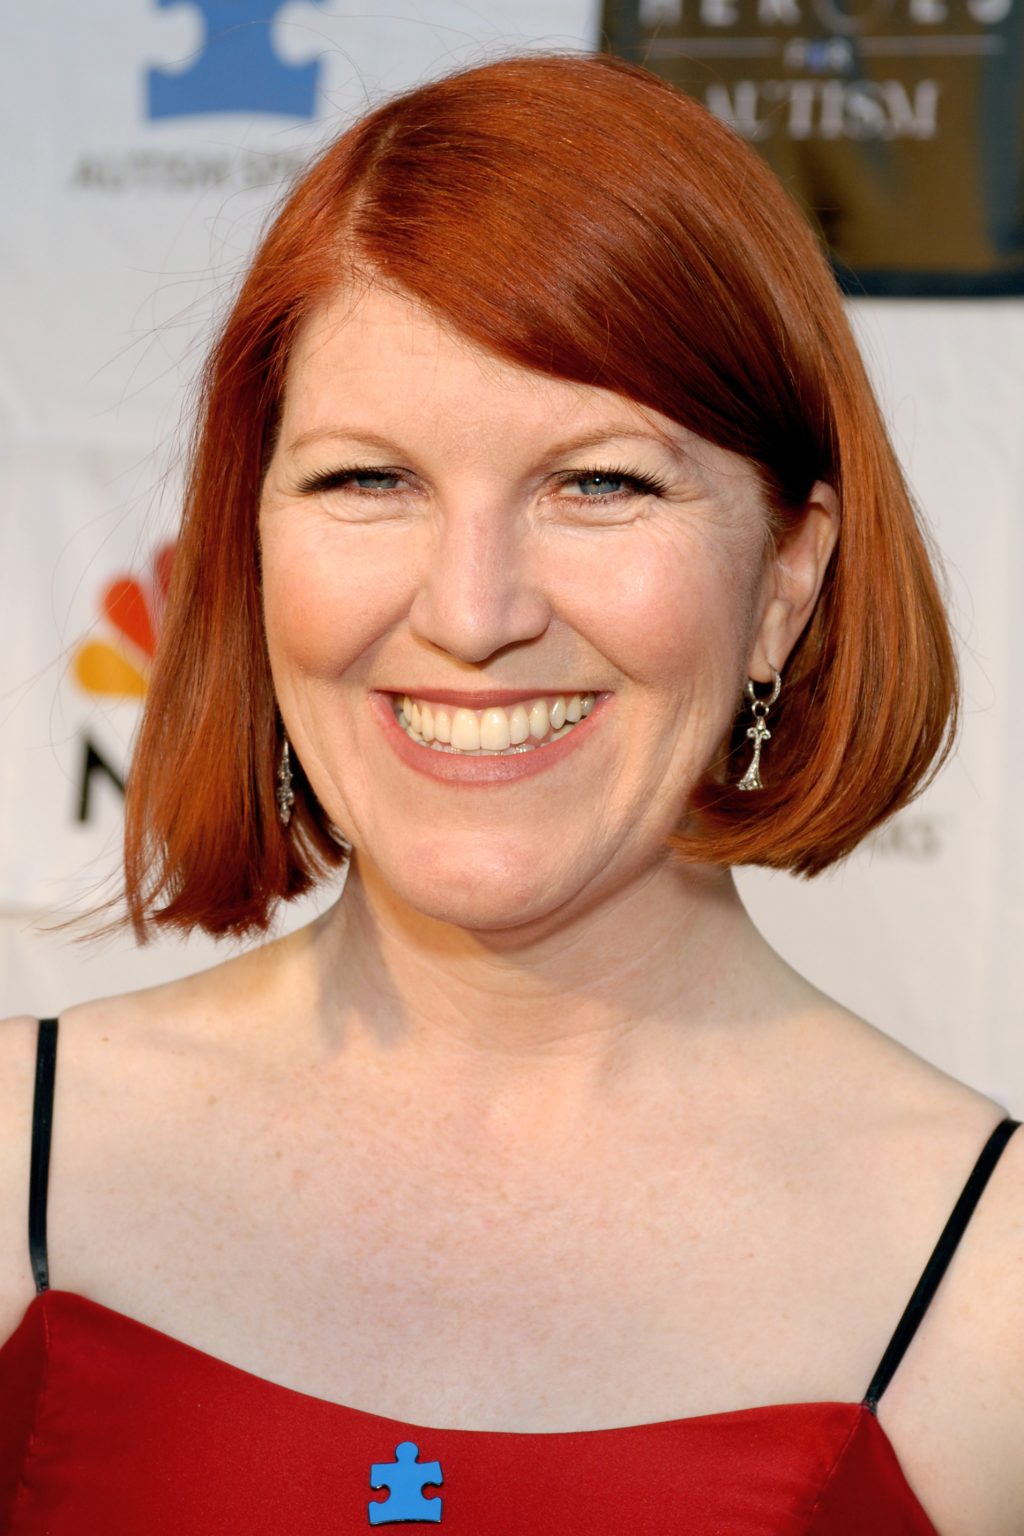 Kate Flannery Plastic Surgery Body Measurements, Facelift, Botox, and